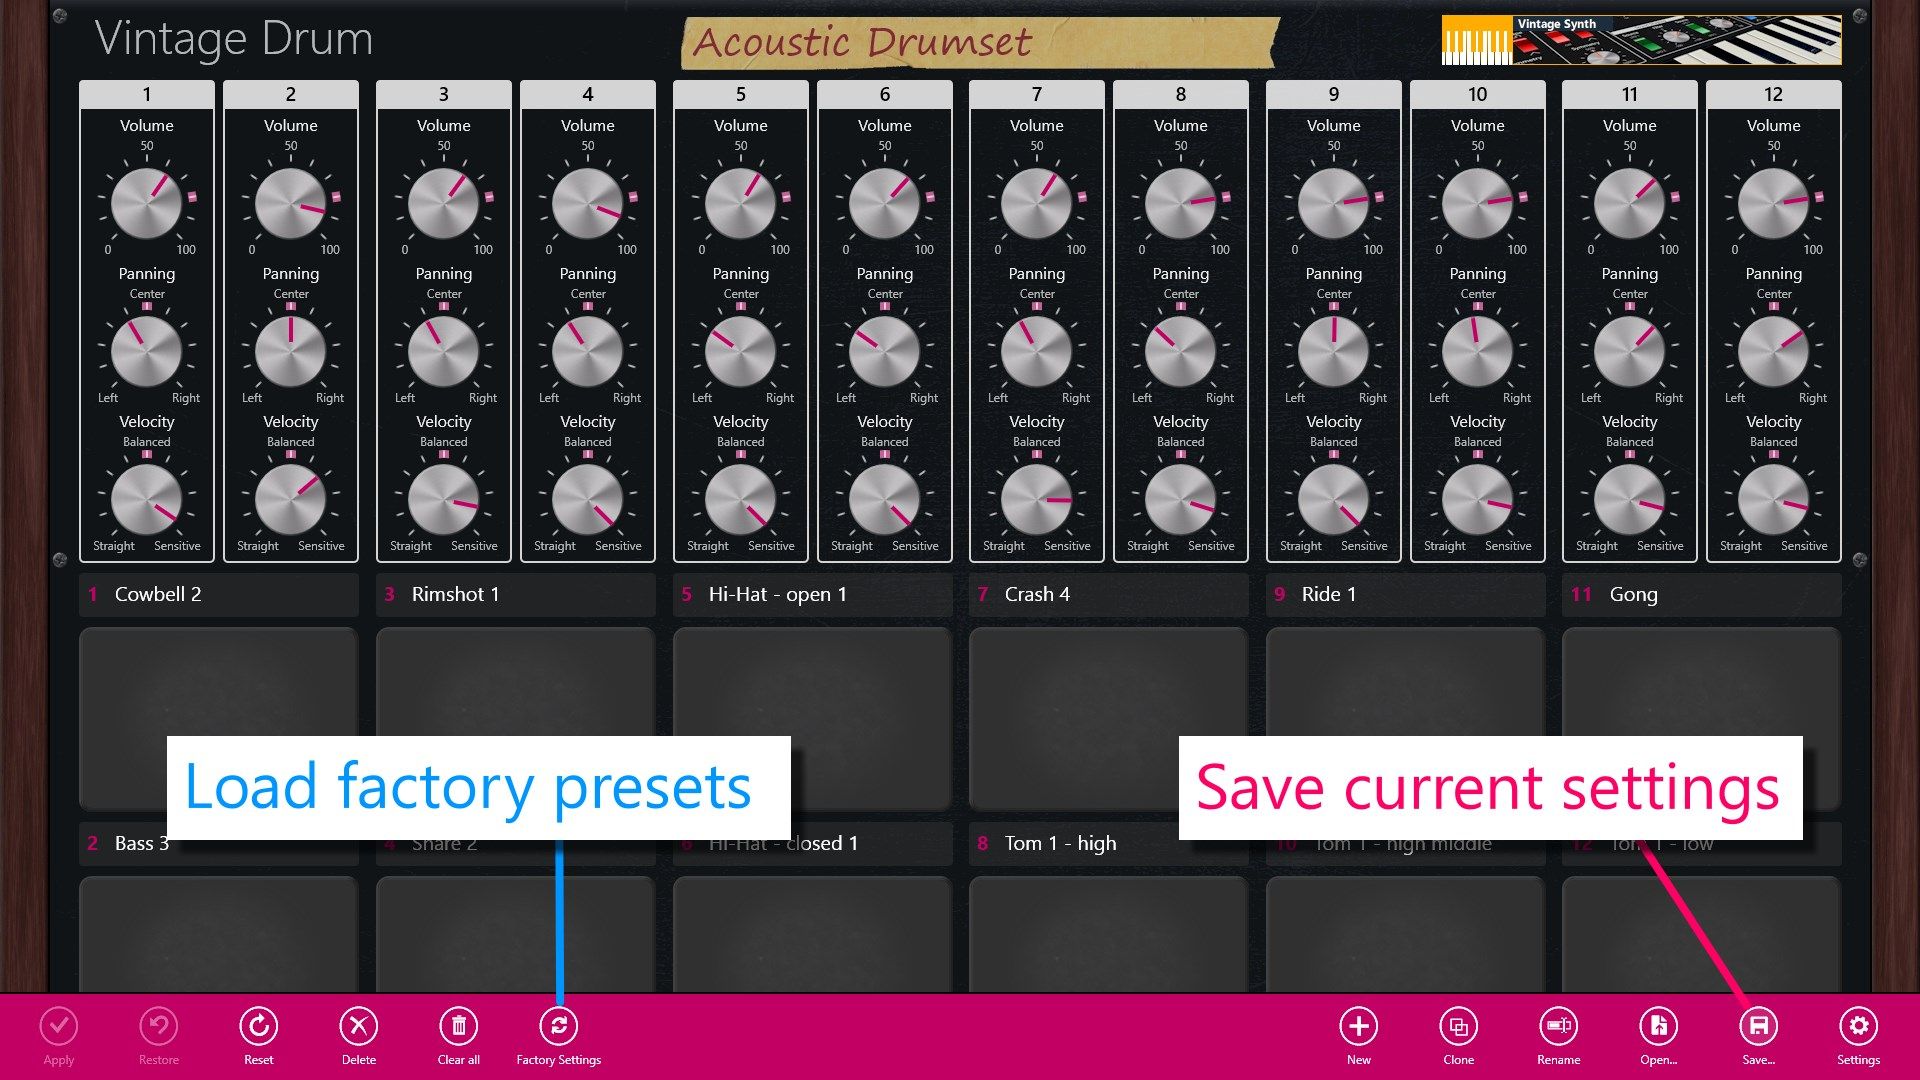 Load the factory presets and save the current settings as an example.